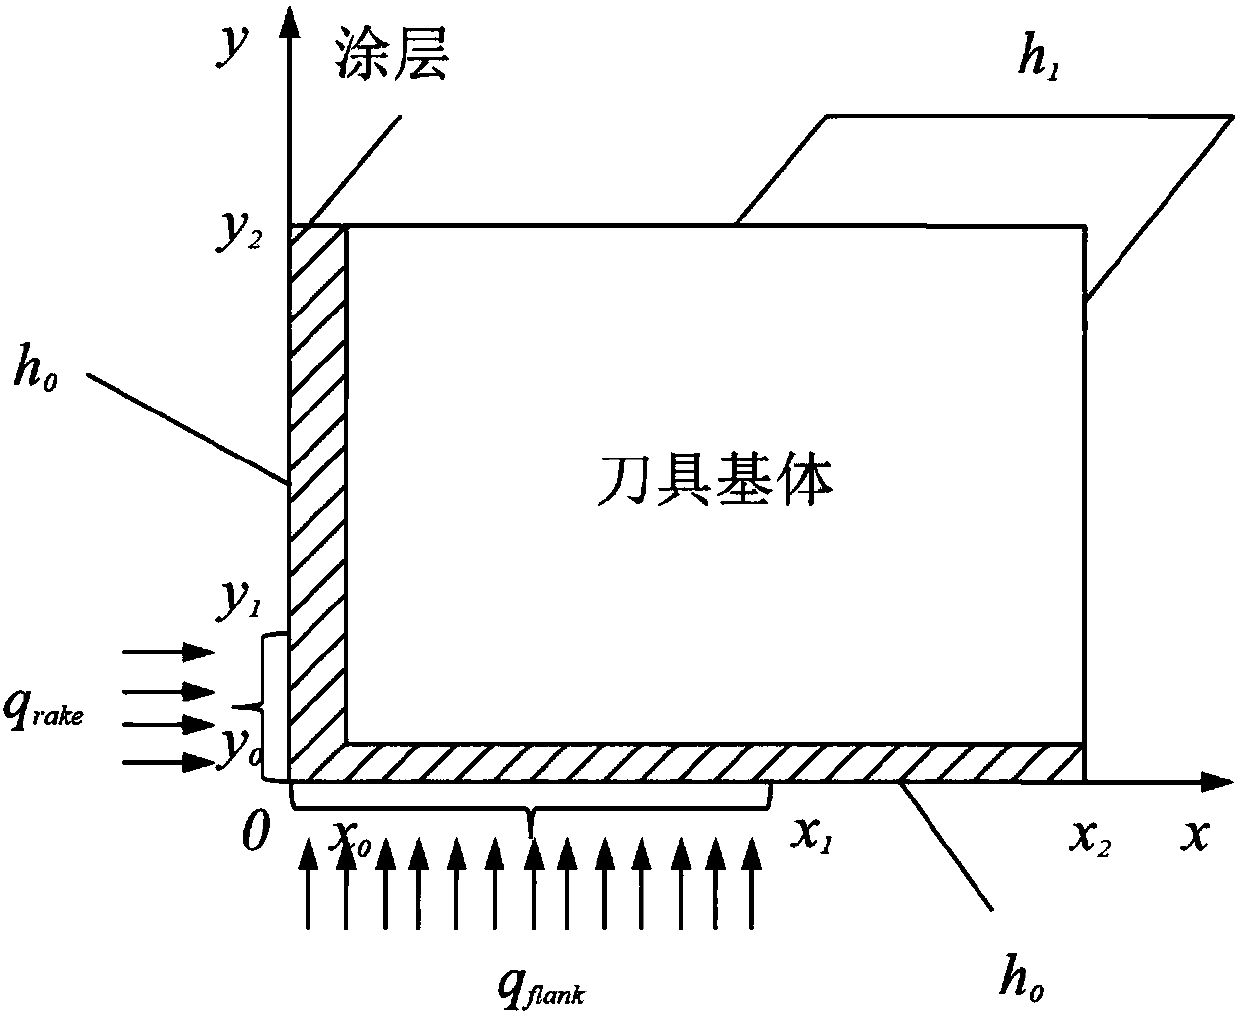 Coating cutter steady-state temperature field predicting method considering cutter rear surface abrasion